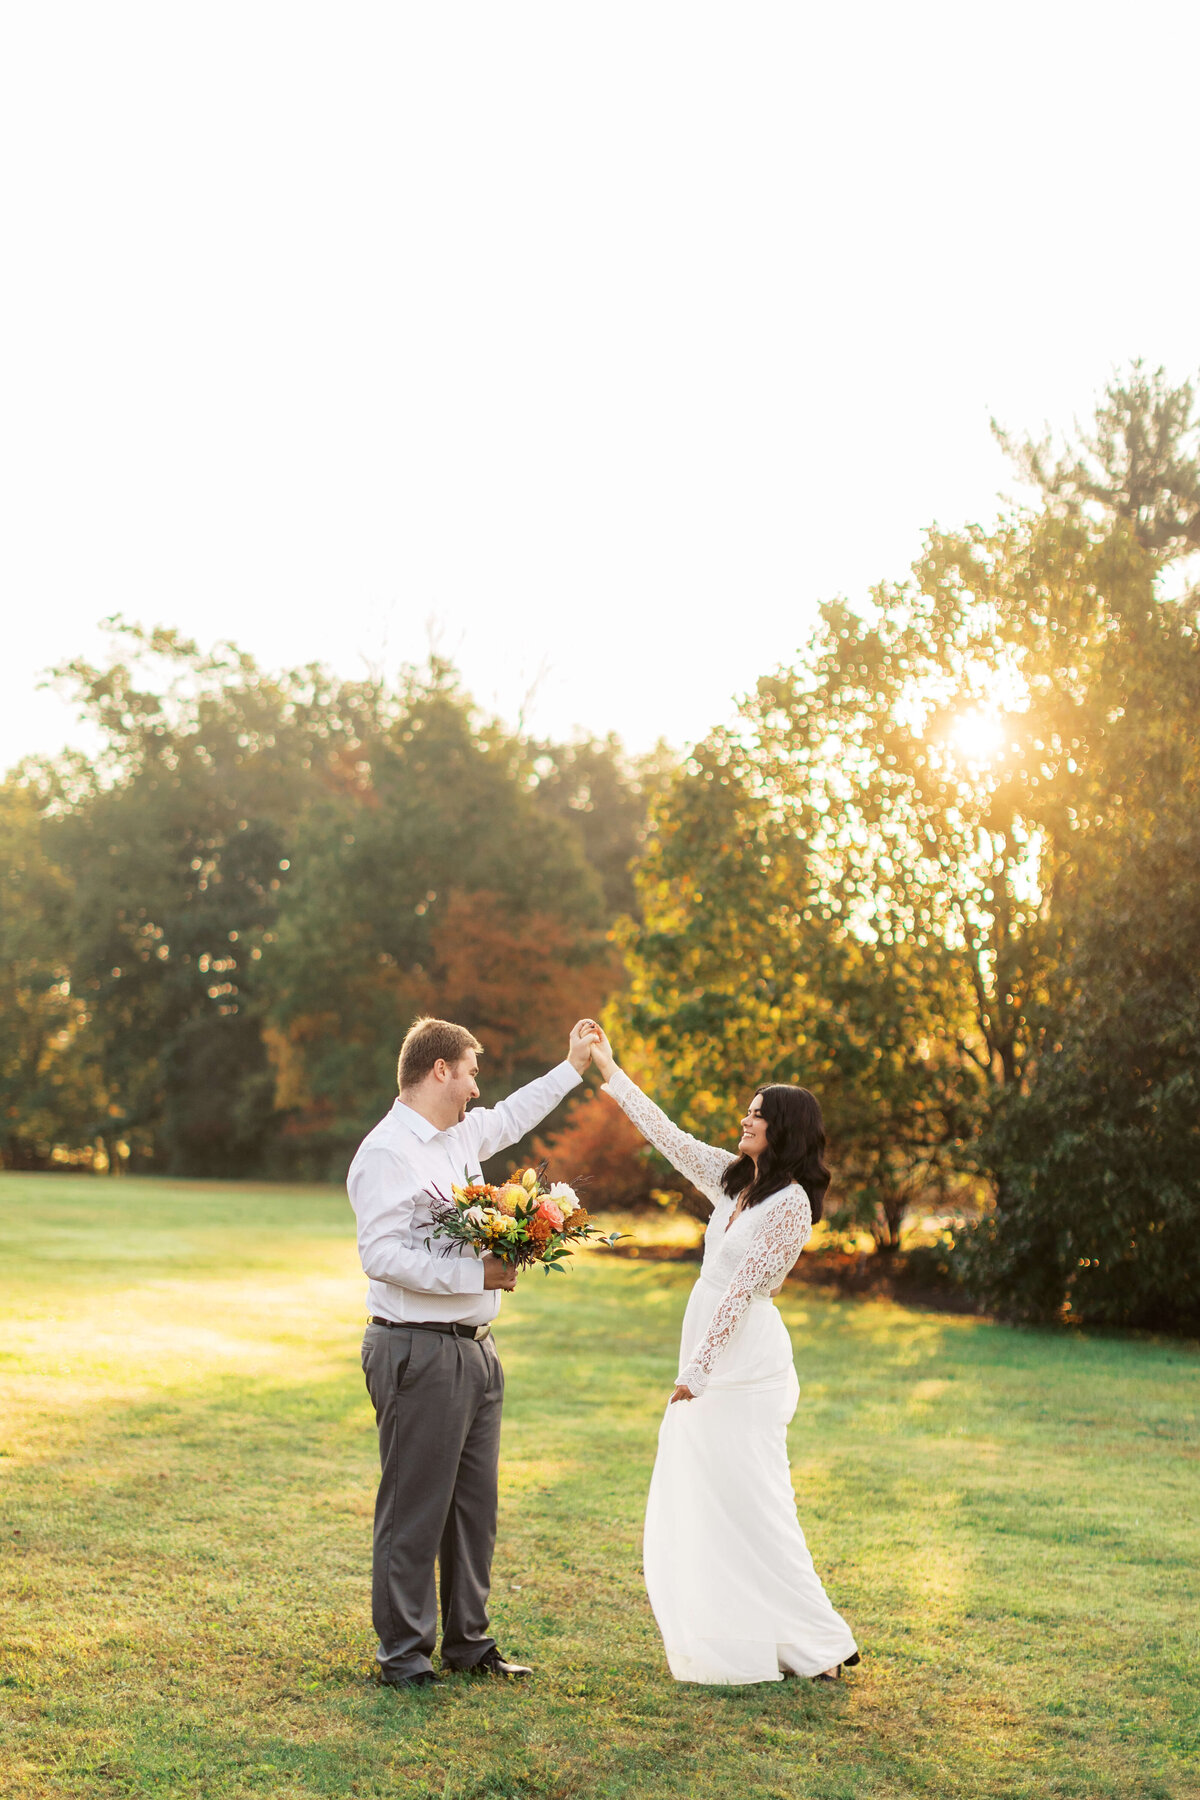 Groom to be holds his fiancee's bouquet while she twirls in a white dress.